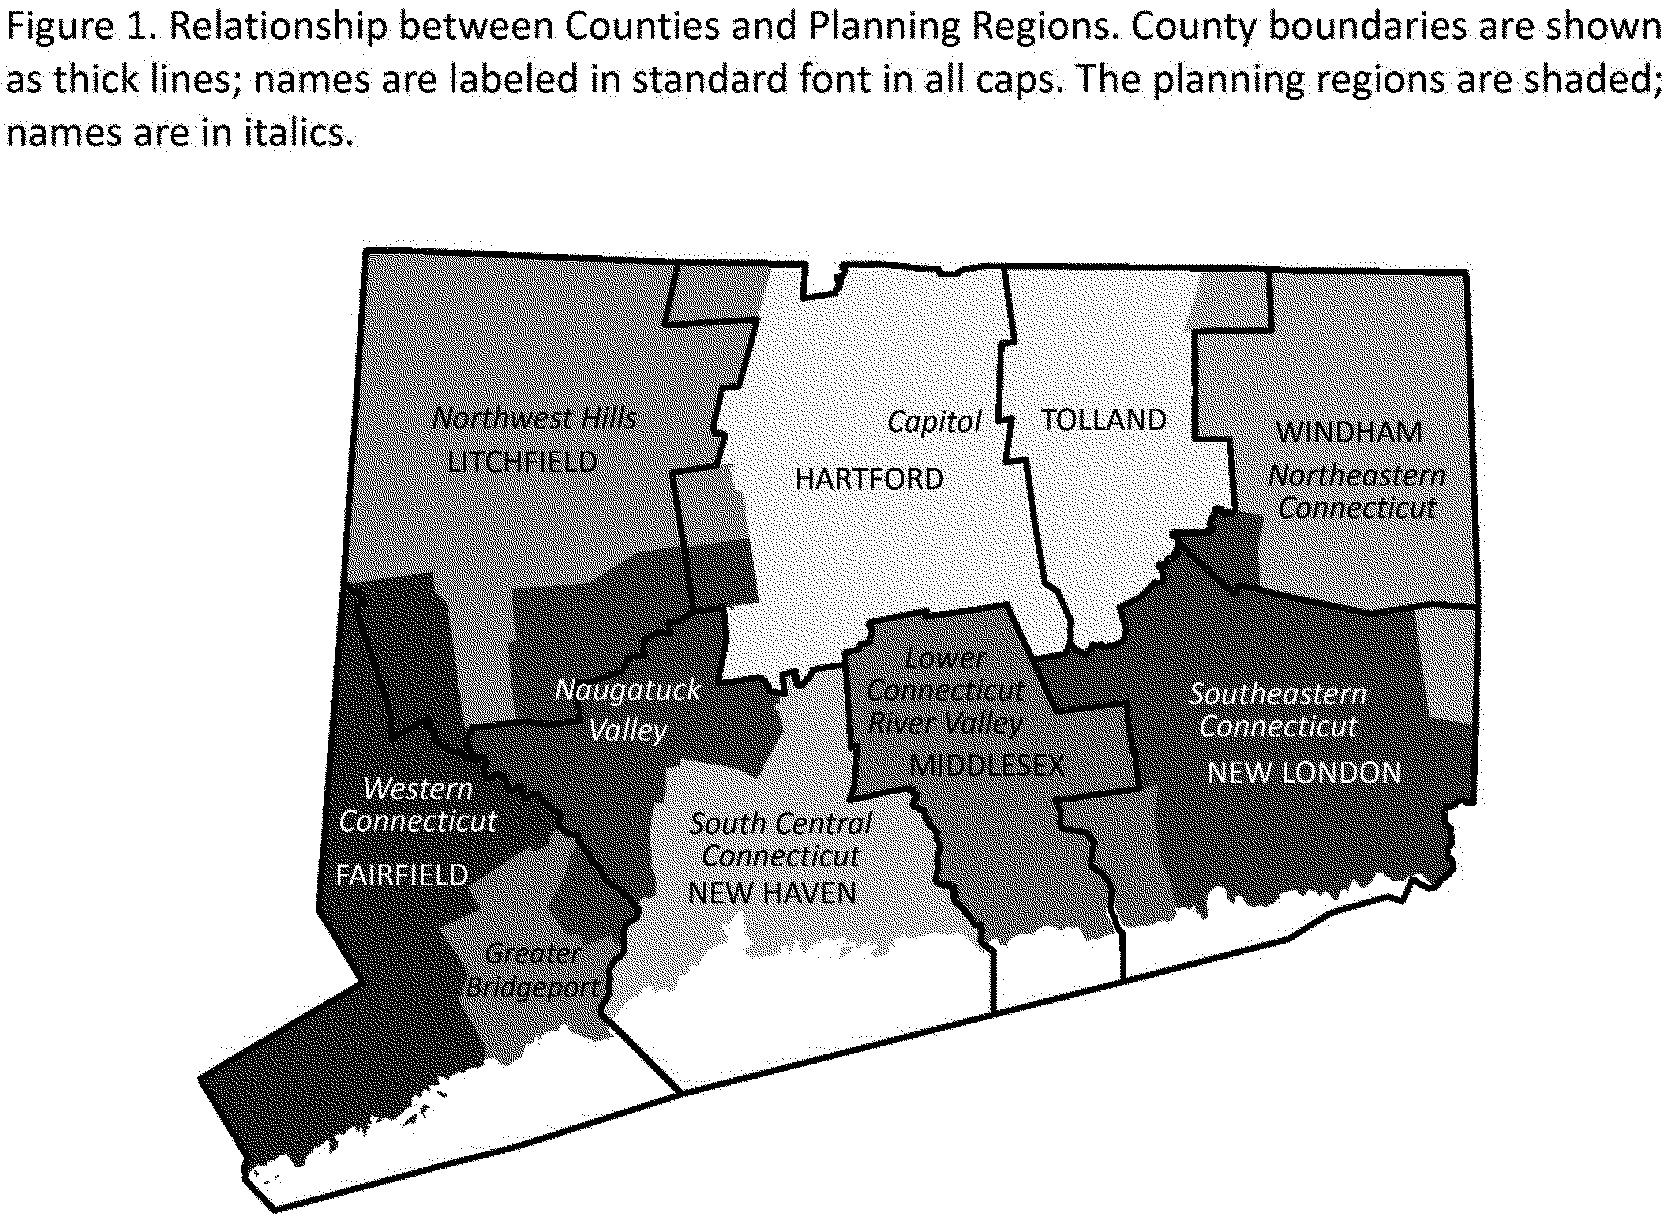 Figure 1. Relationship between Counties and Planning Regions. County boundaries are shown as thick lines; names are labeled in standard font in all caps. The planning regions are shaded; names are in italics.